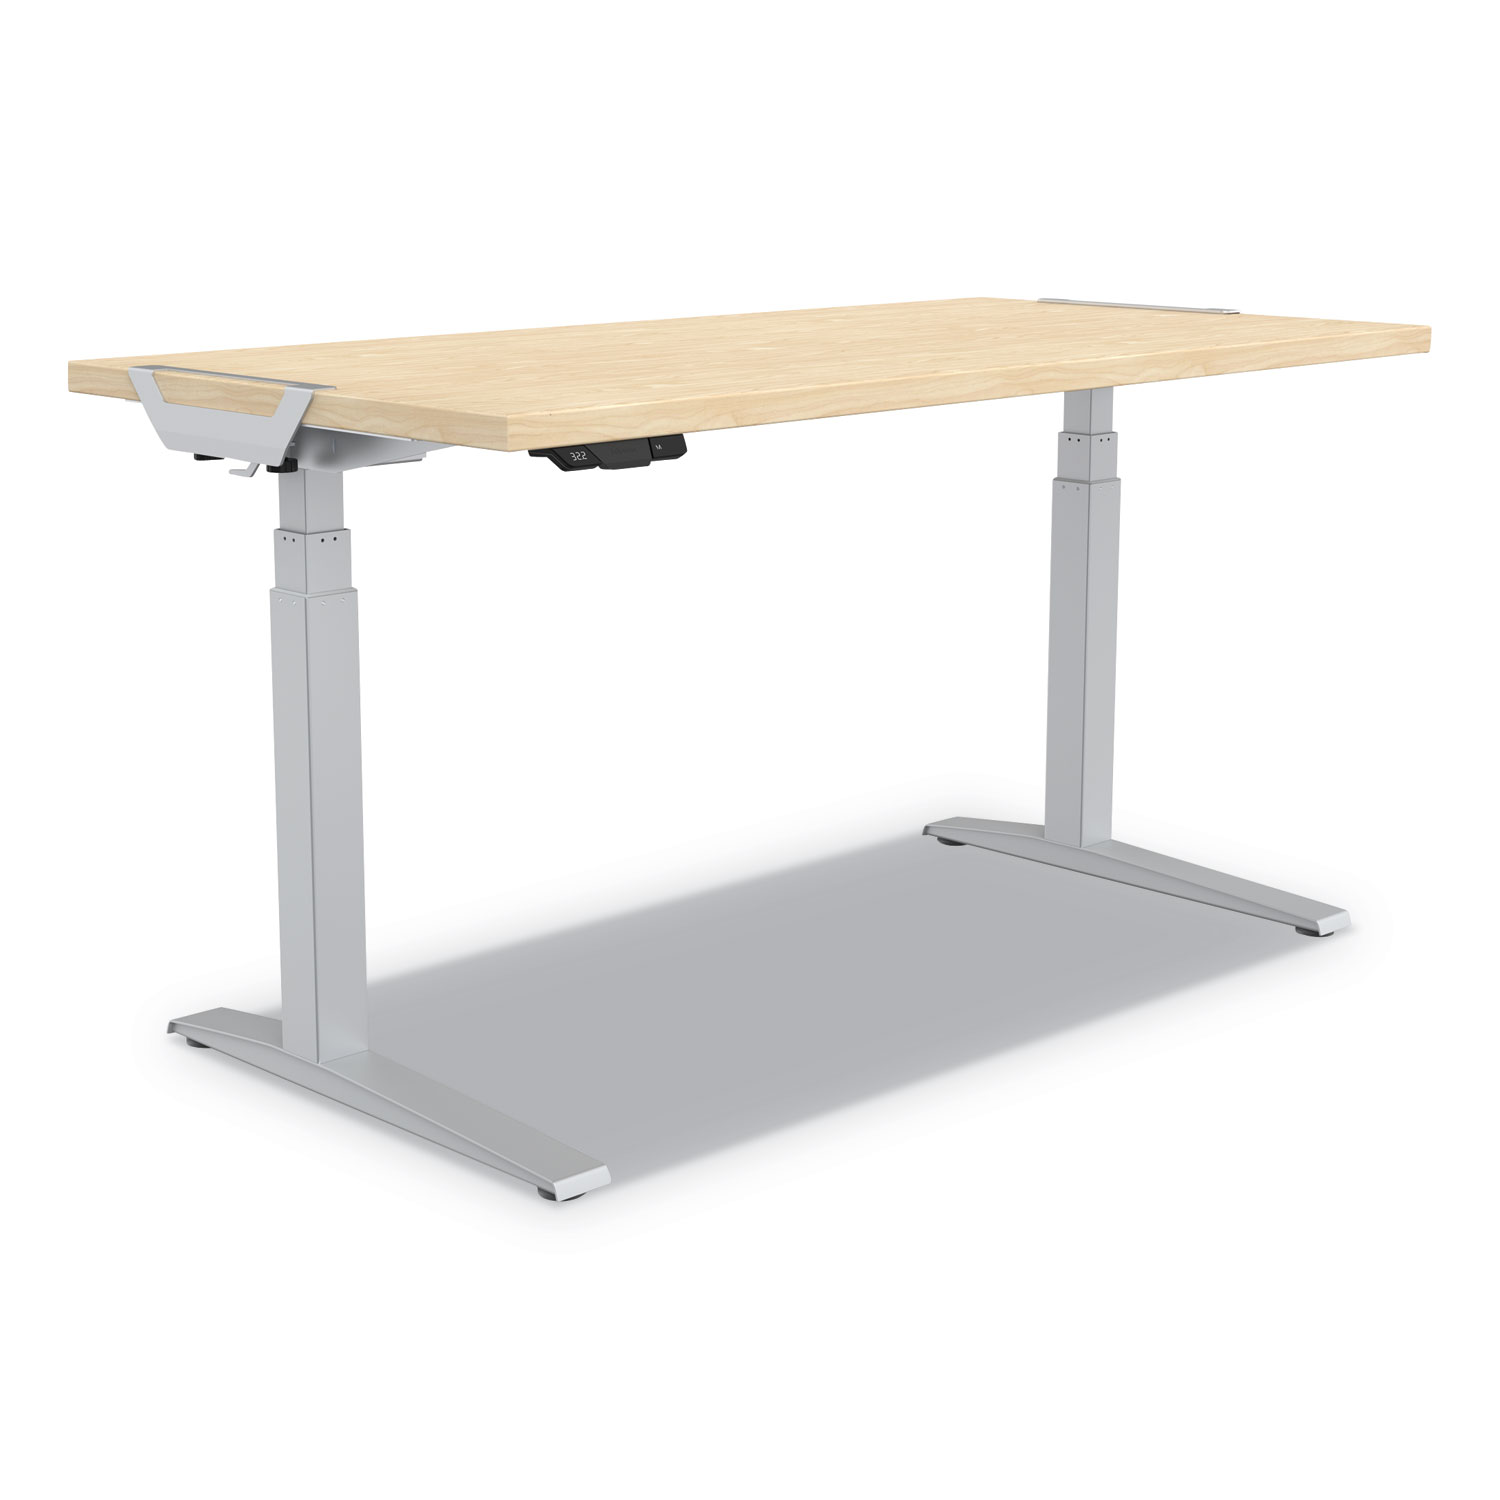  Fellowes 9649801 Levado Laminate Table Top (Top Only), 60w x 30d, Maple (FEL9649801) 